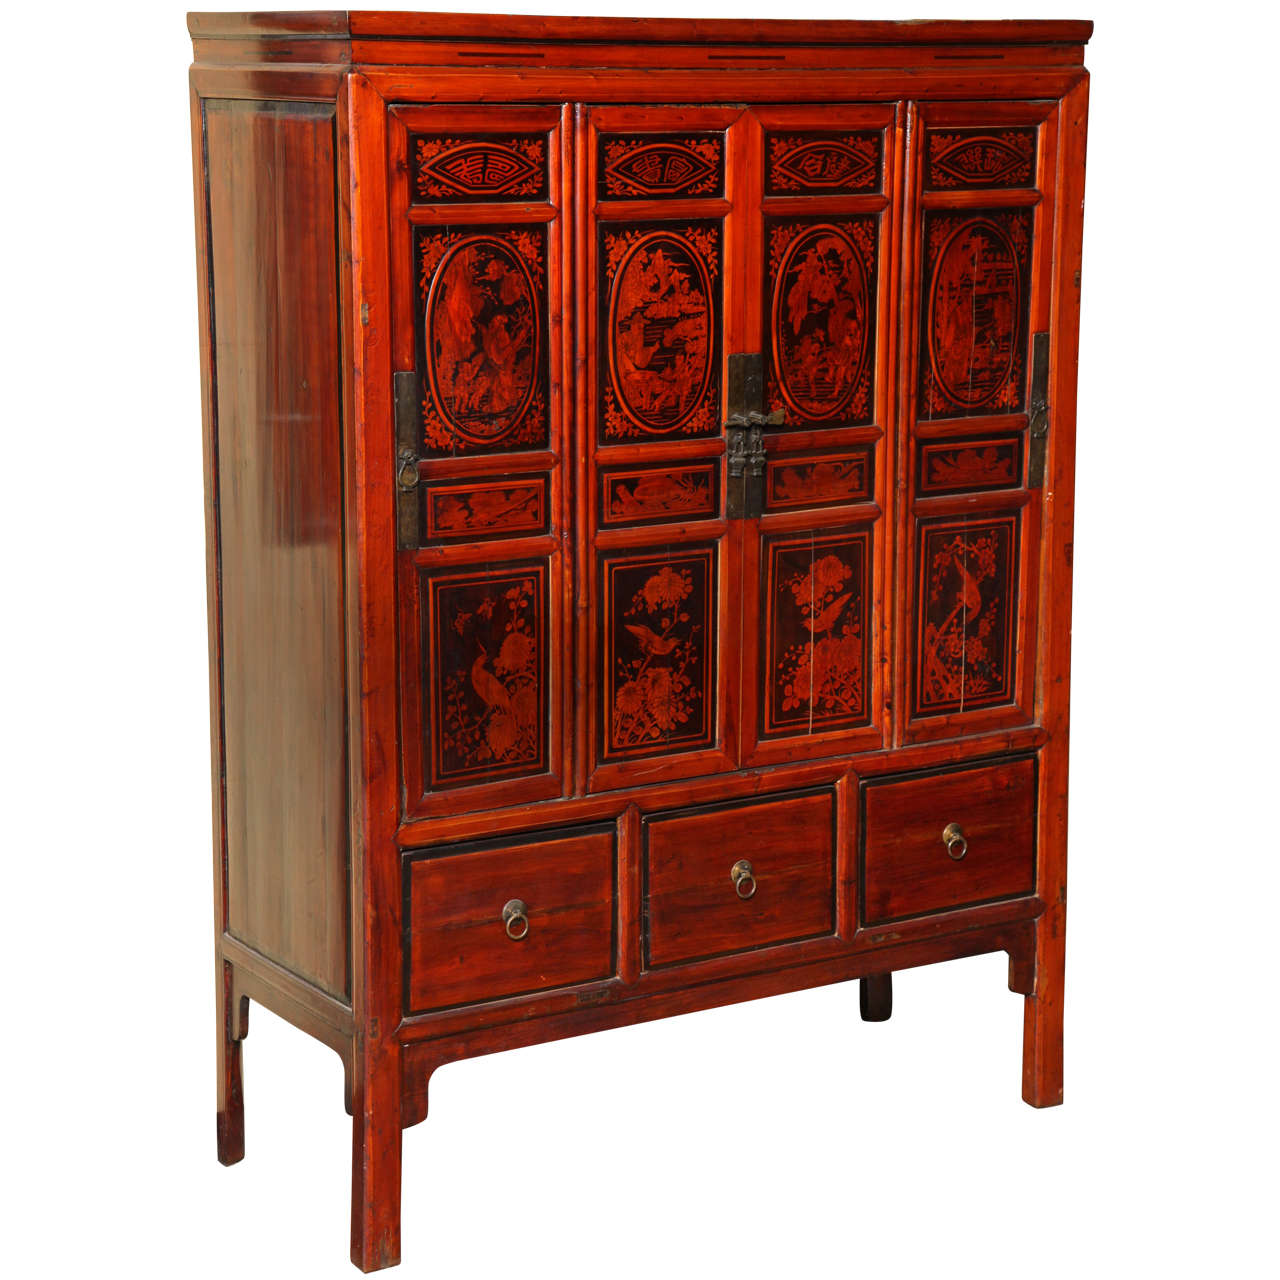 Chinese Turn of the Century Lacquered Four-Door Cabinet with Painted Motifs